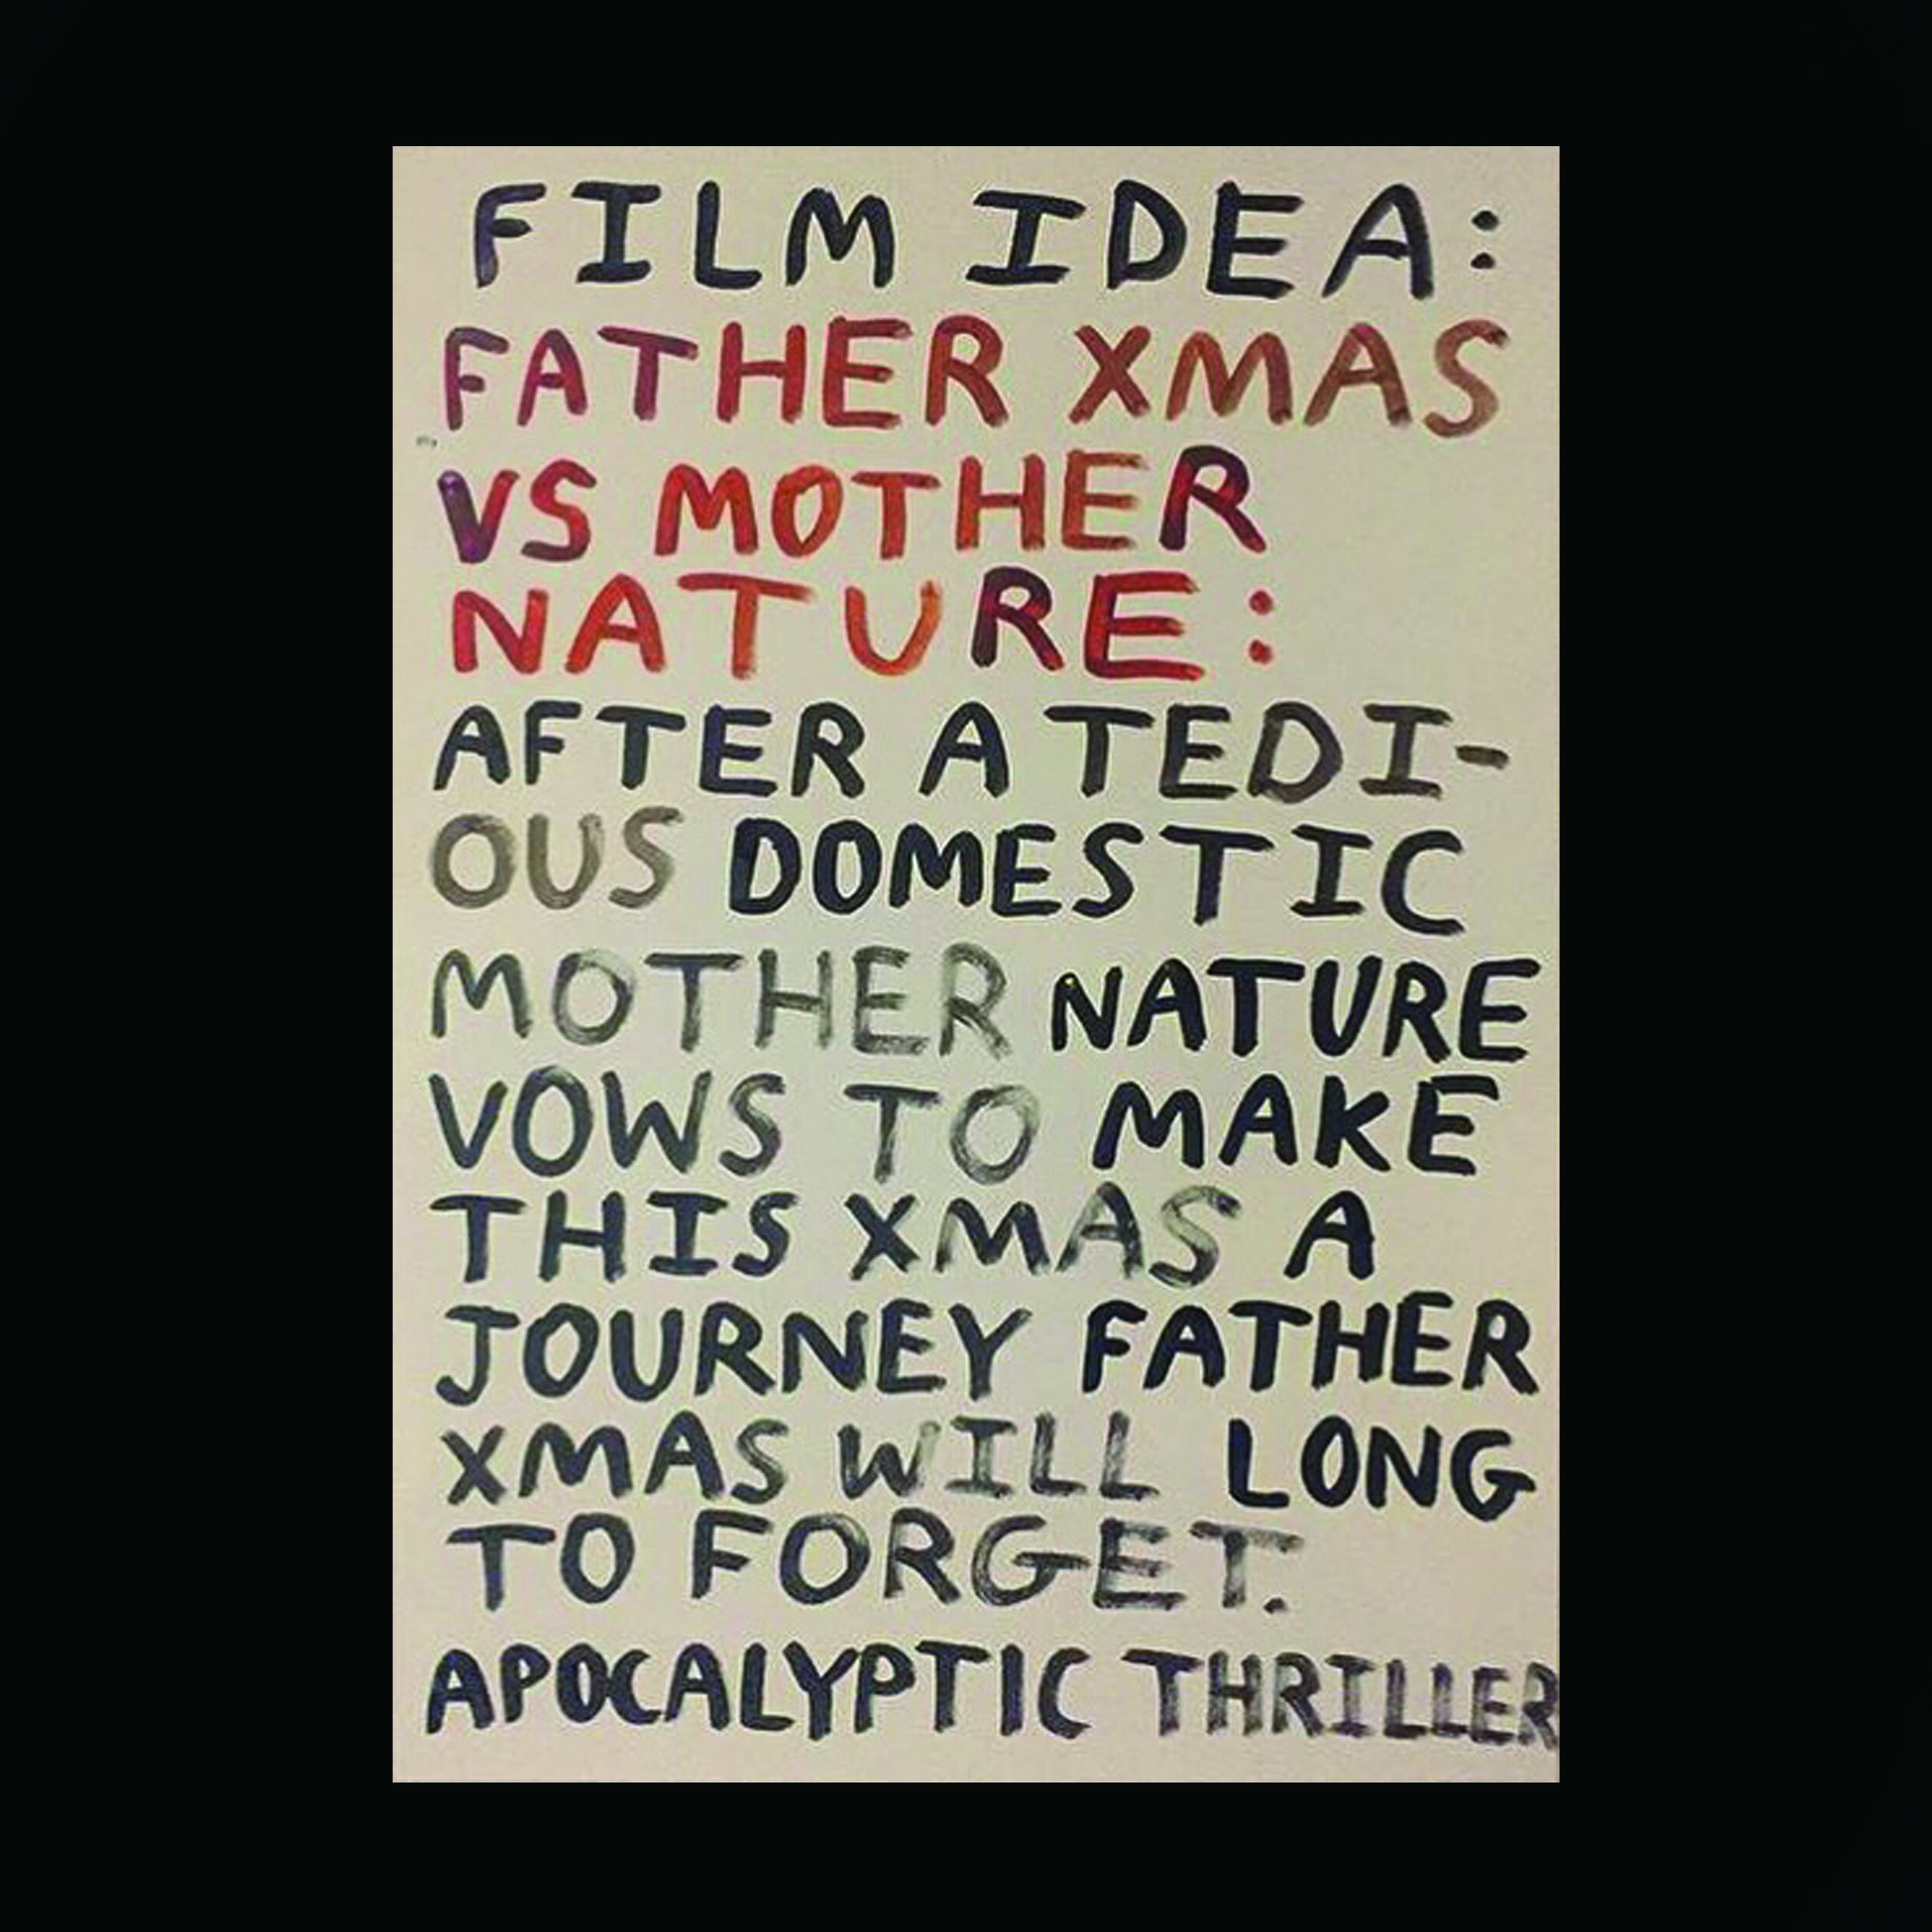 FATHER XMAS VS MOTHER NATURE.jpg